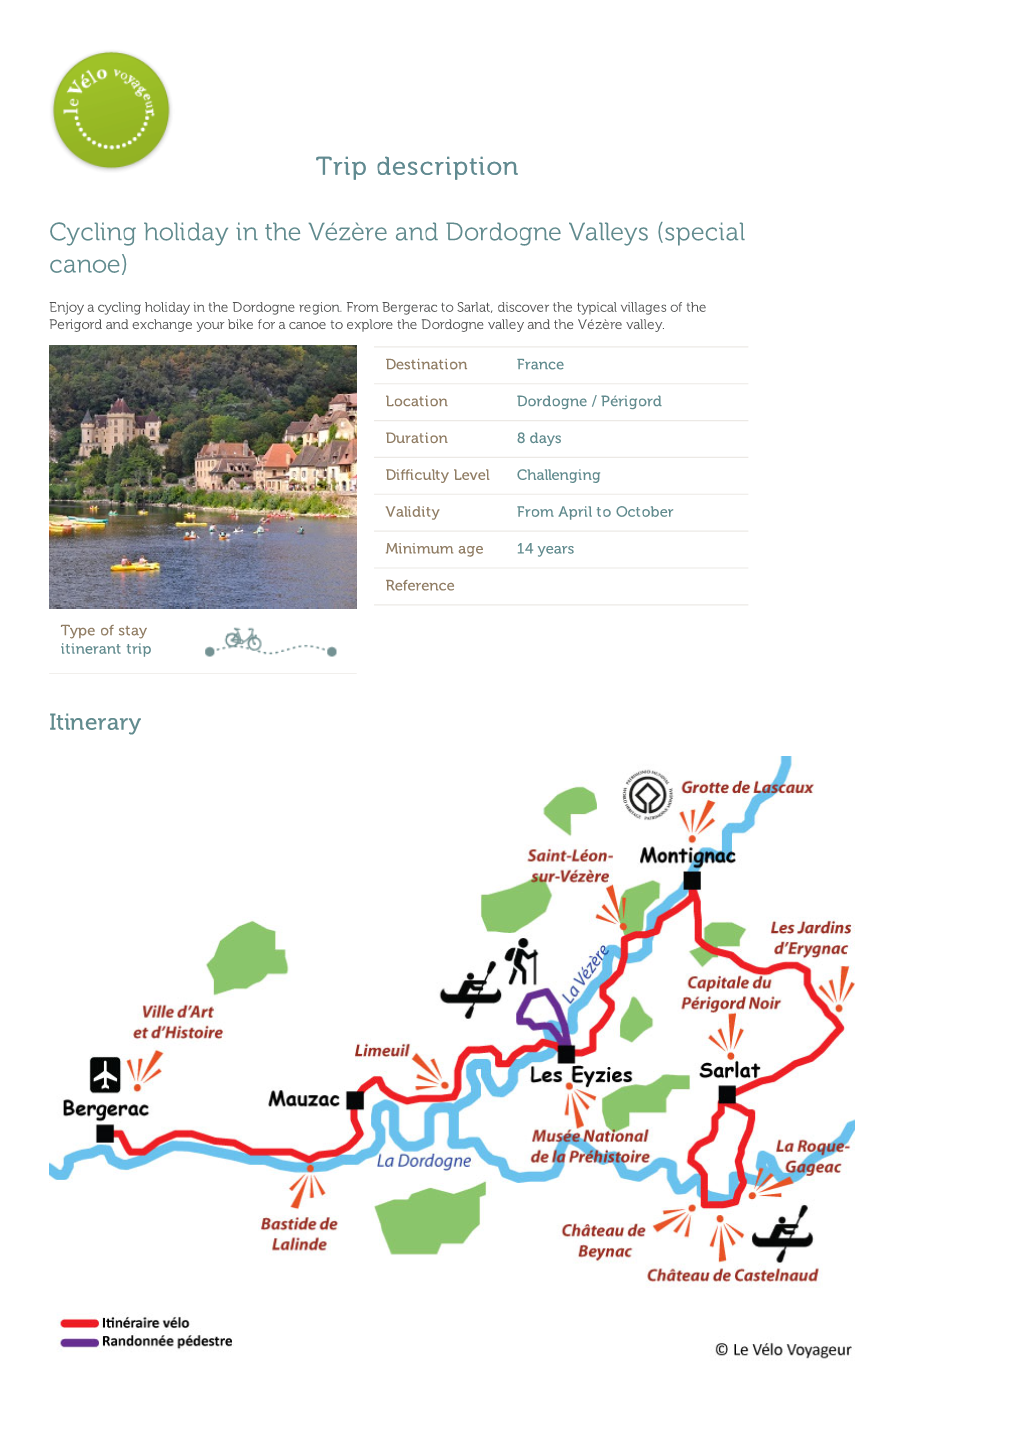 Trip Description Cycling Holiday in the Vézère and Dordogne Valleys